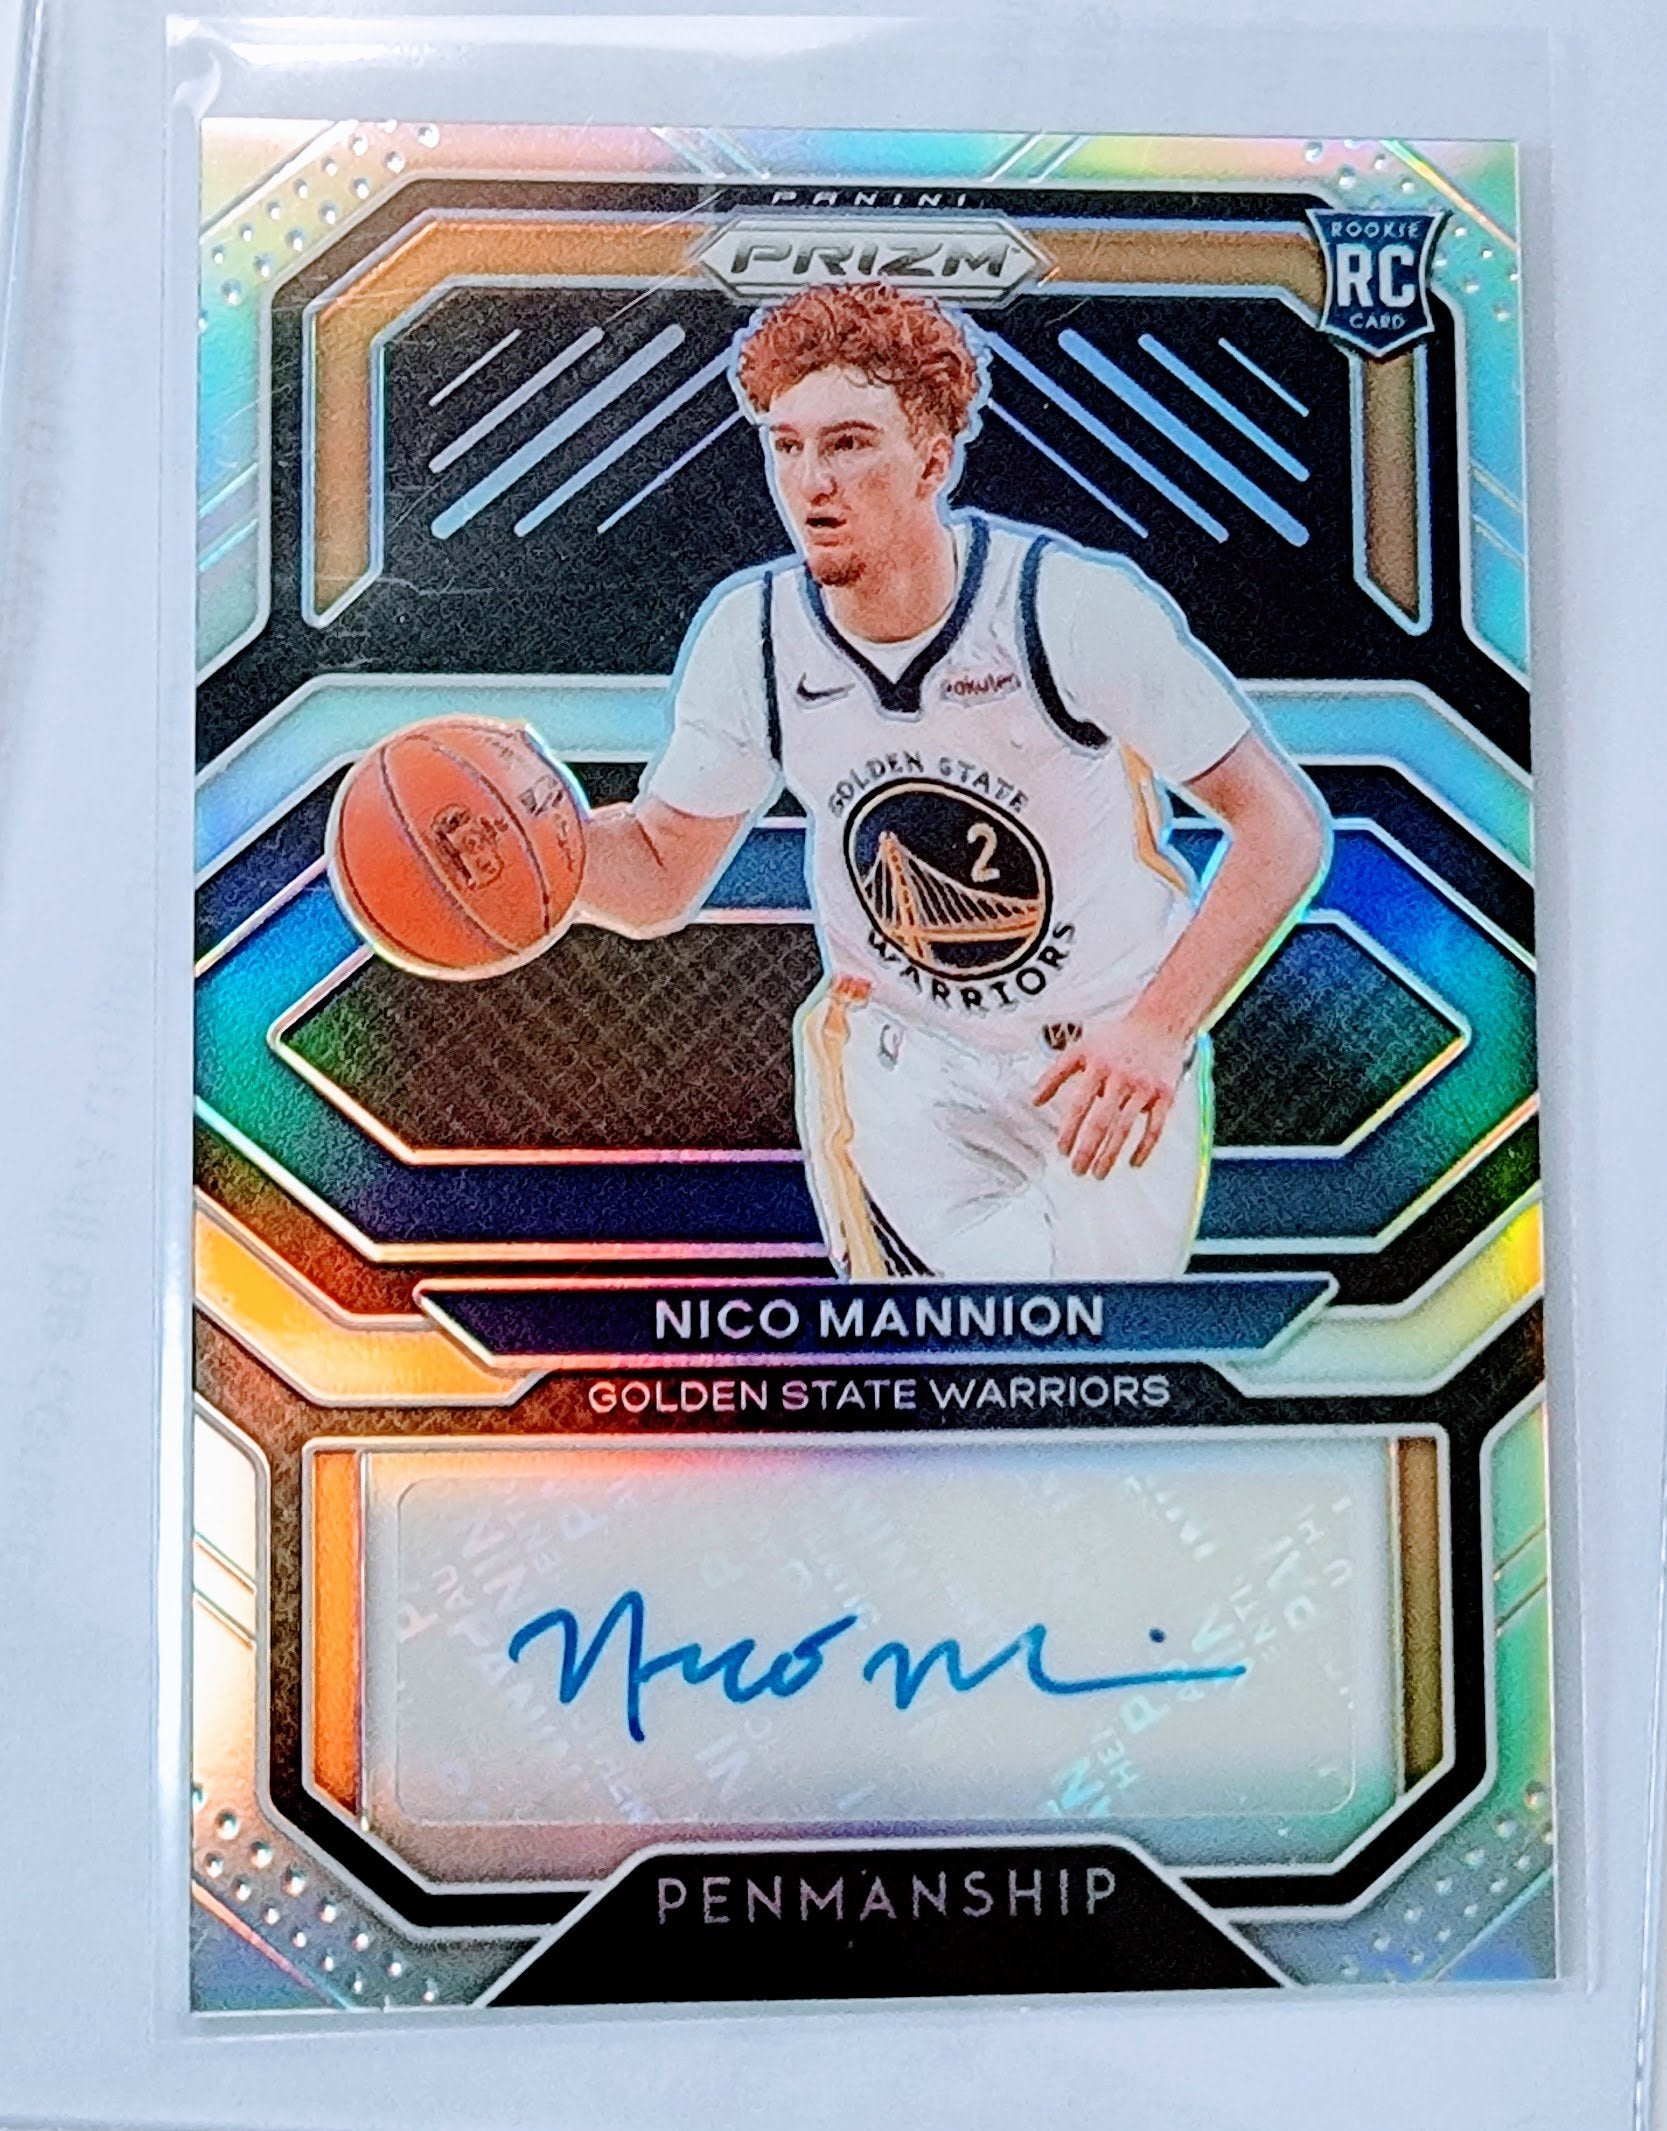 2020-21 Panini Prizm Nico Mannion Penmanship Autographed Rookie Refractor Basketball Trading Card GRB1 simple Xclusive Collectibles   